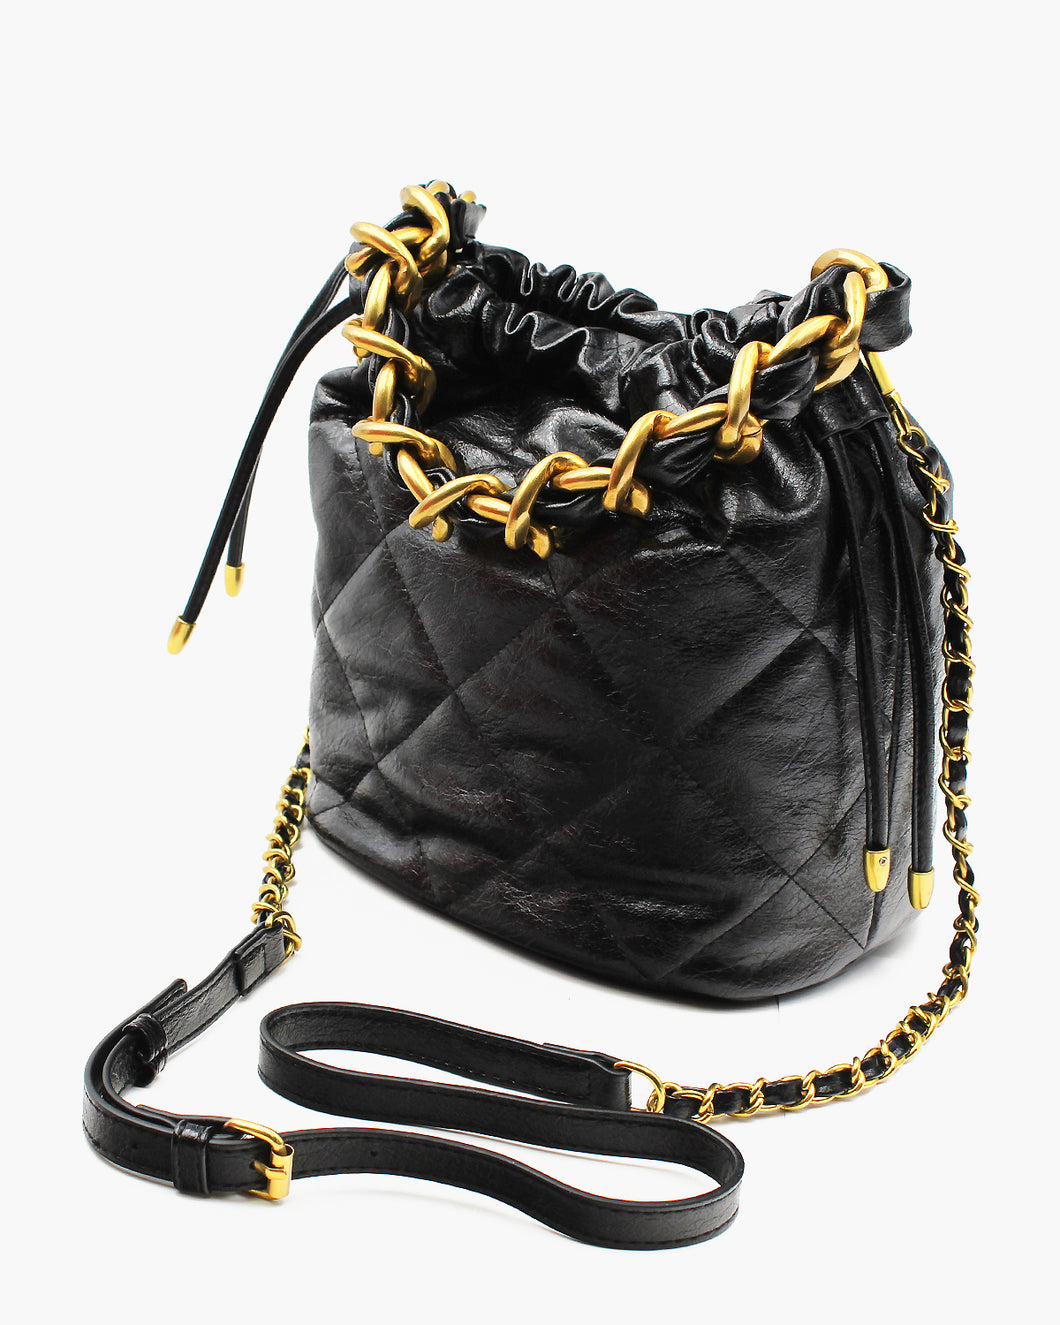 Glossy Rich Textured Leather Bag with Brass Hardware